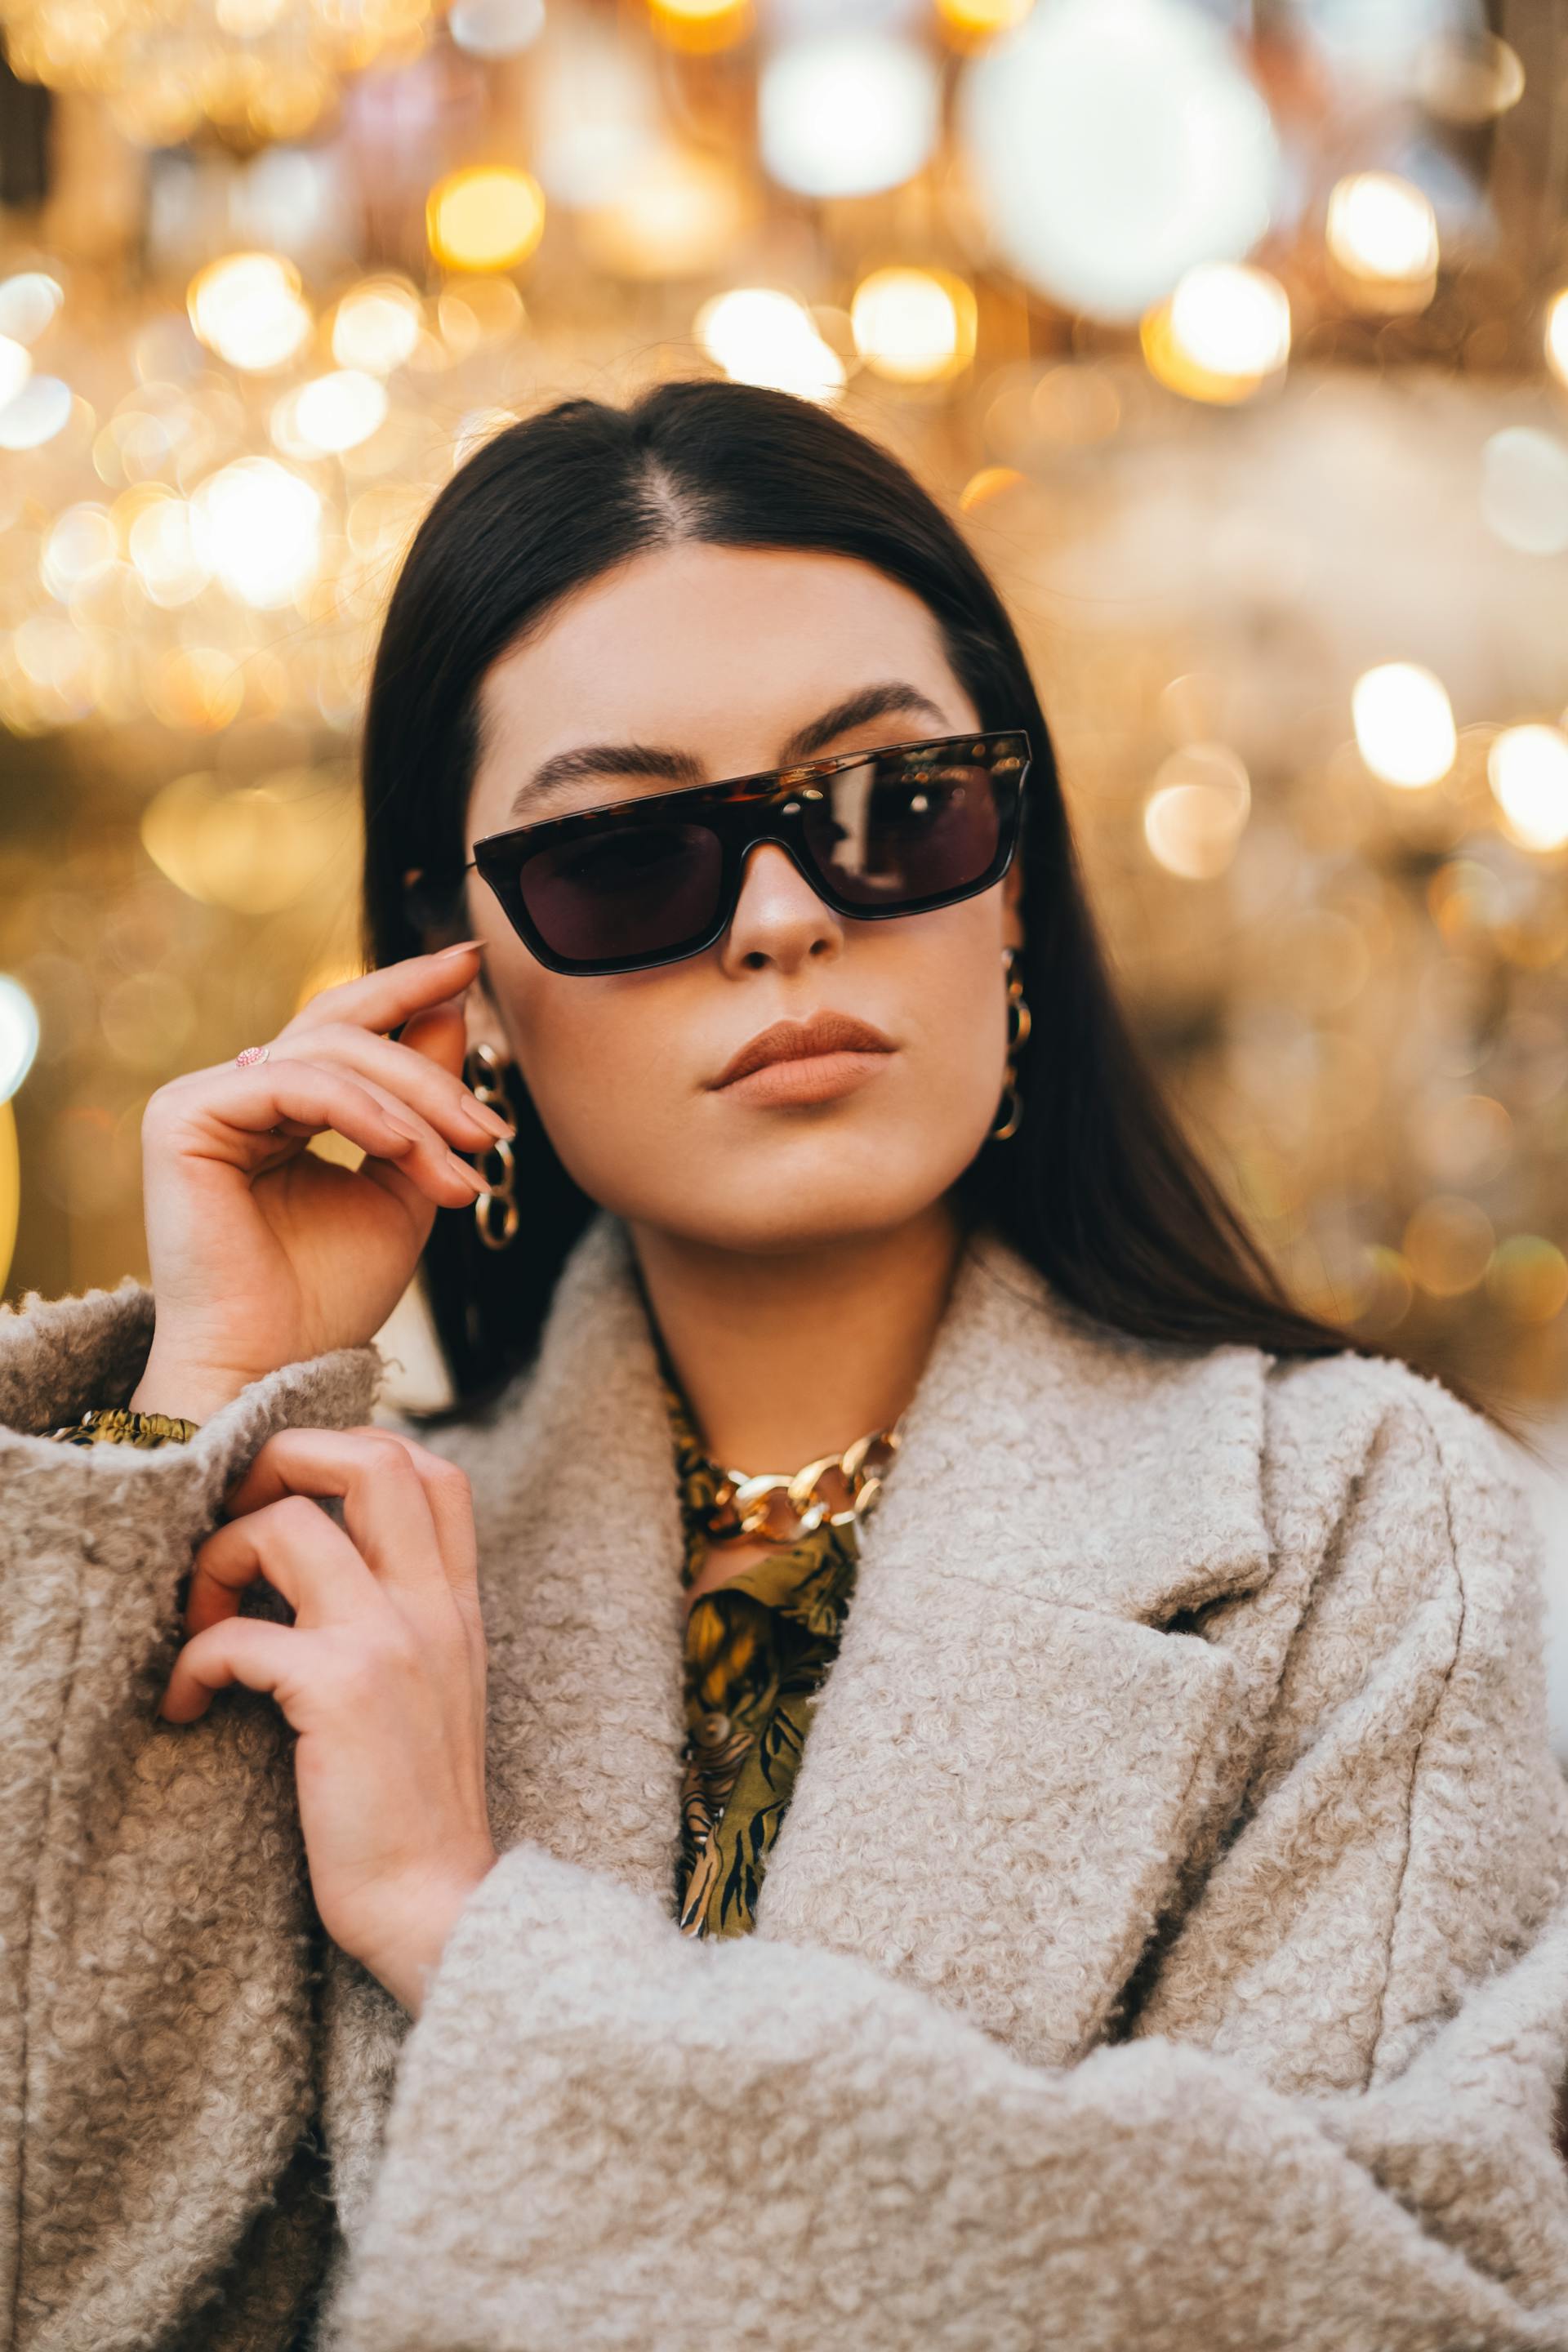 A woman wearing expensive clothes | Source: Pexels